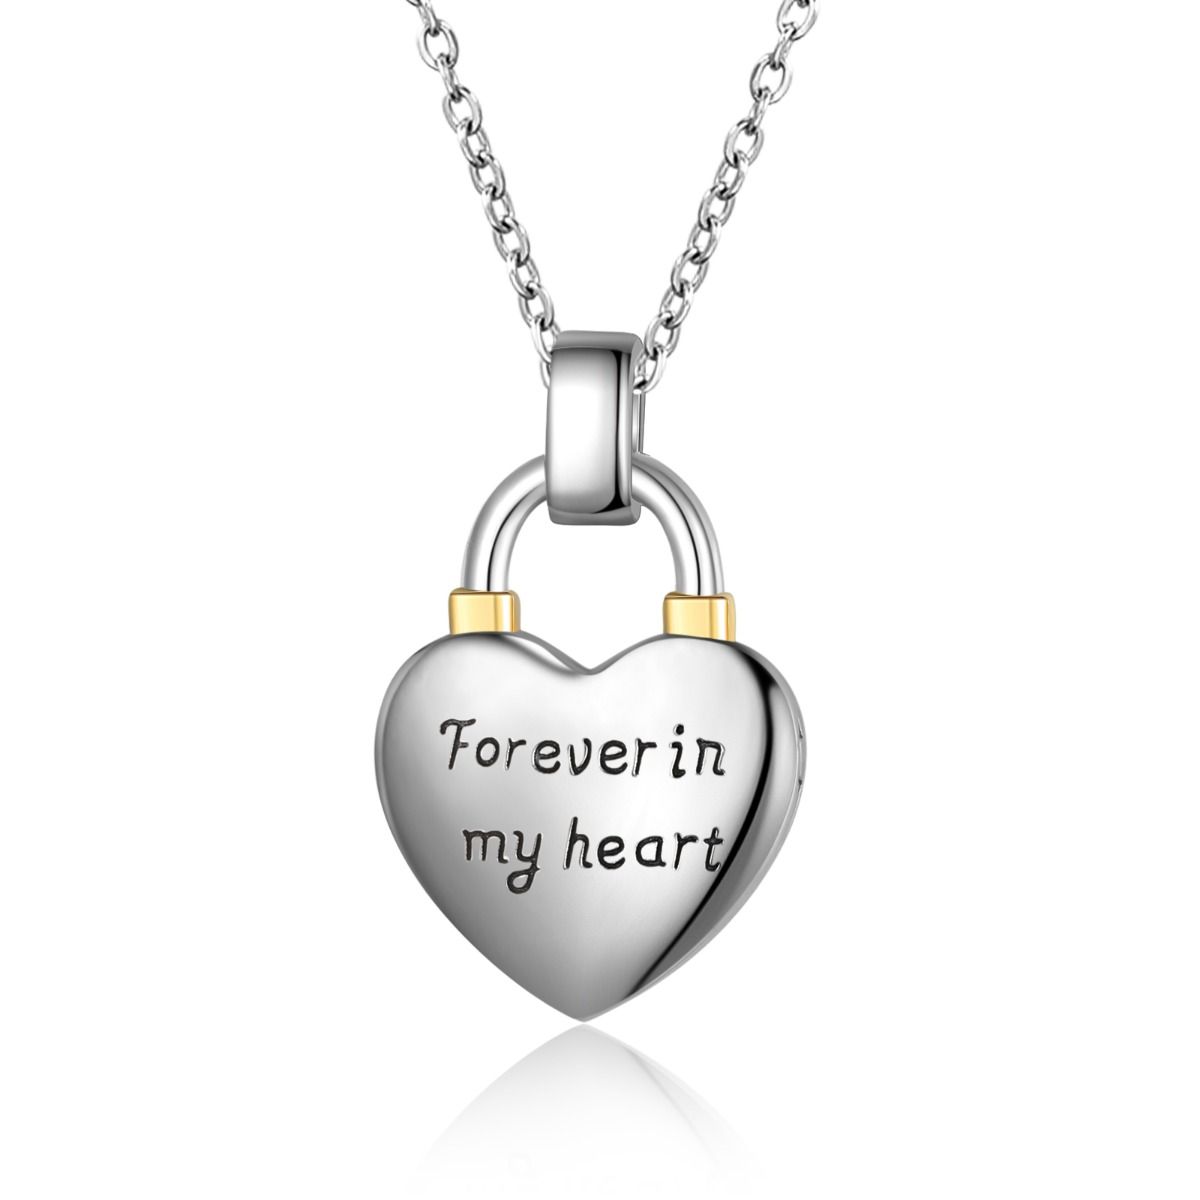 Personalised Heart Lock Photo Necklace | Custom Engraved Necklace With Photo